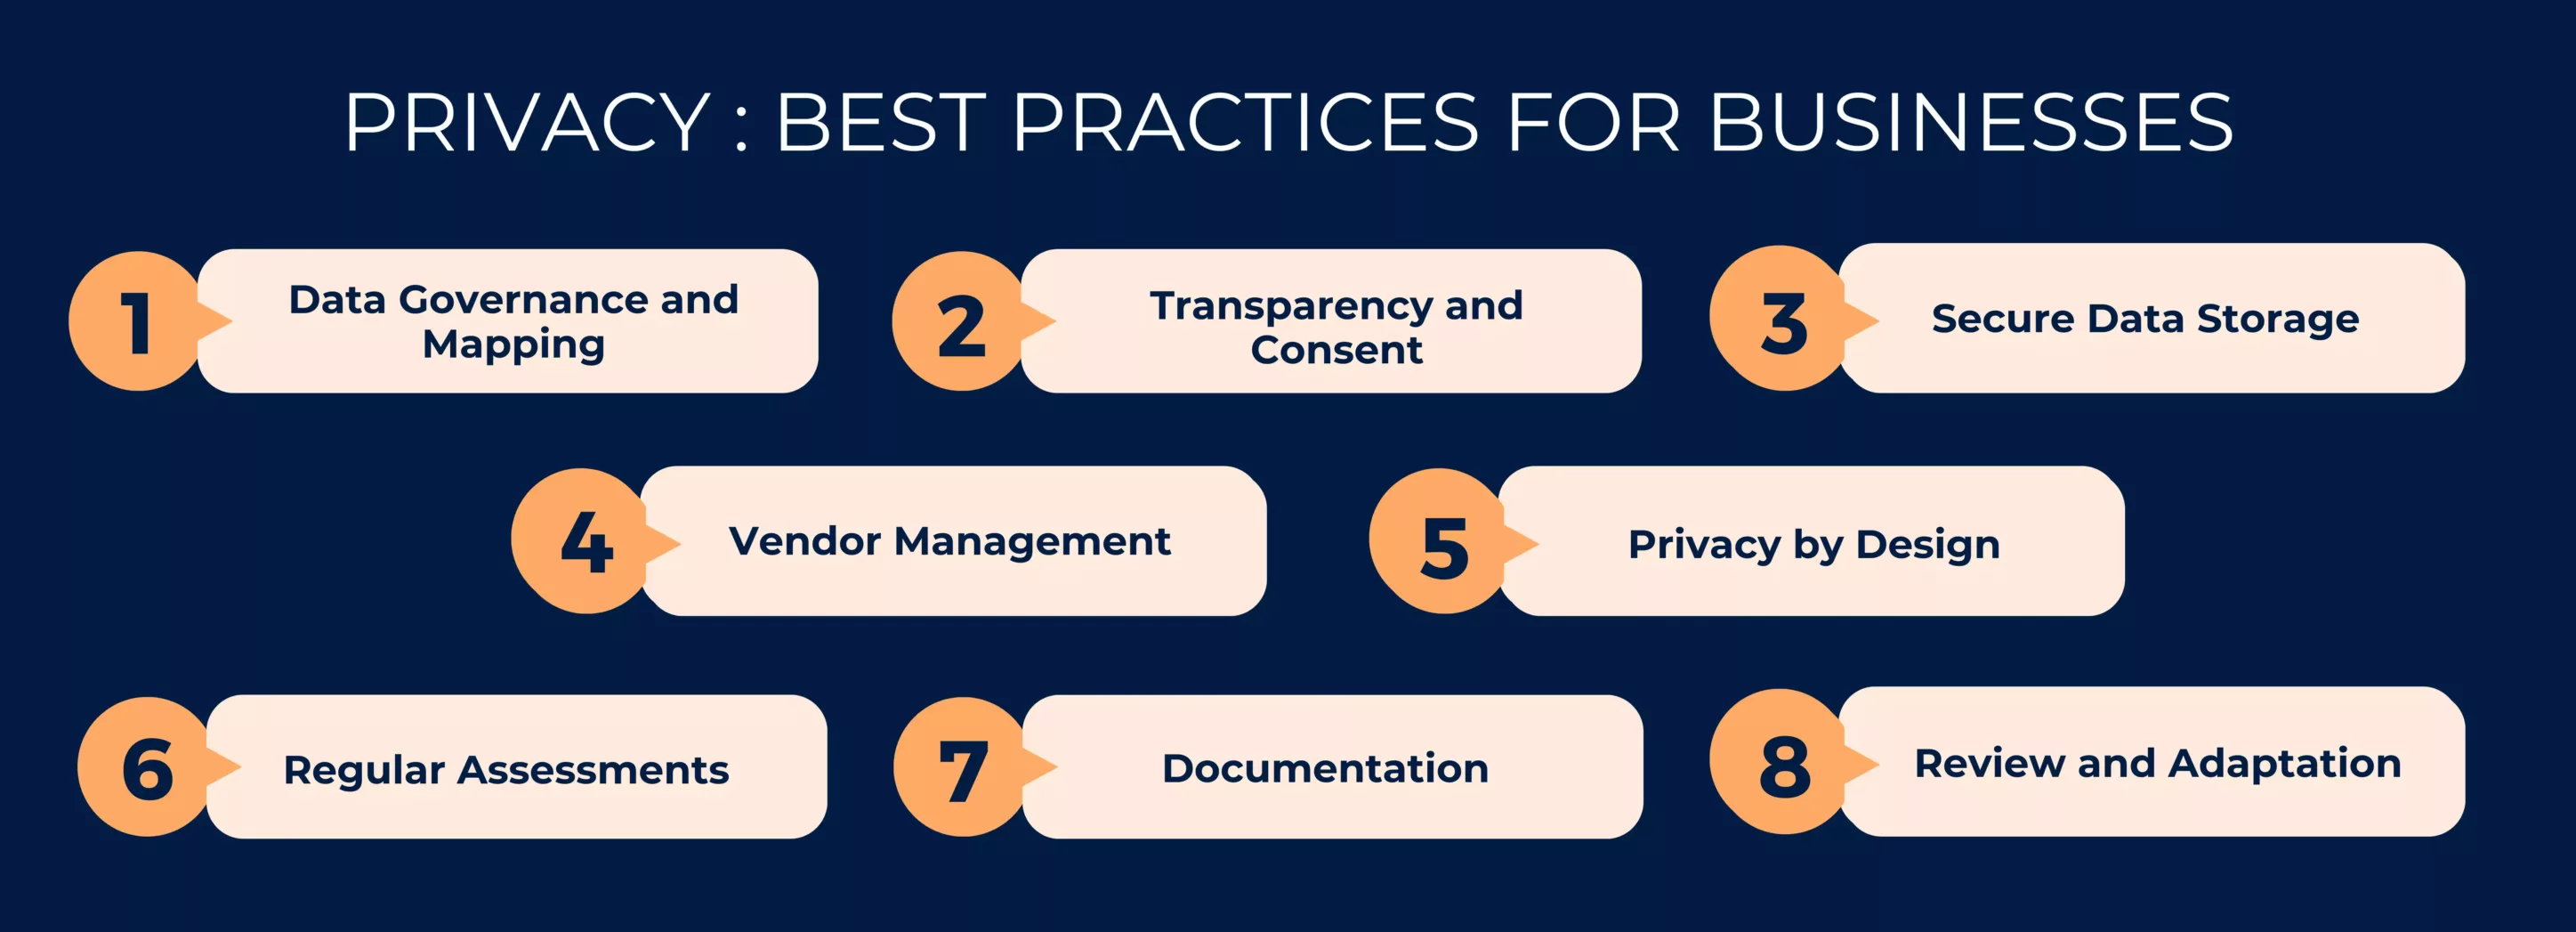 Privacy best practices for businesses